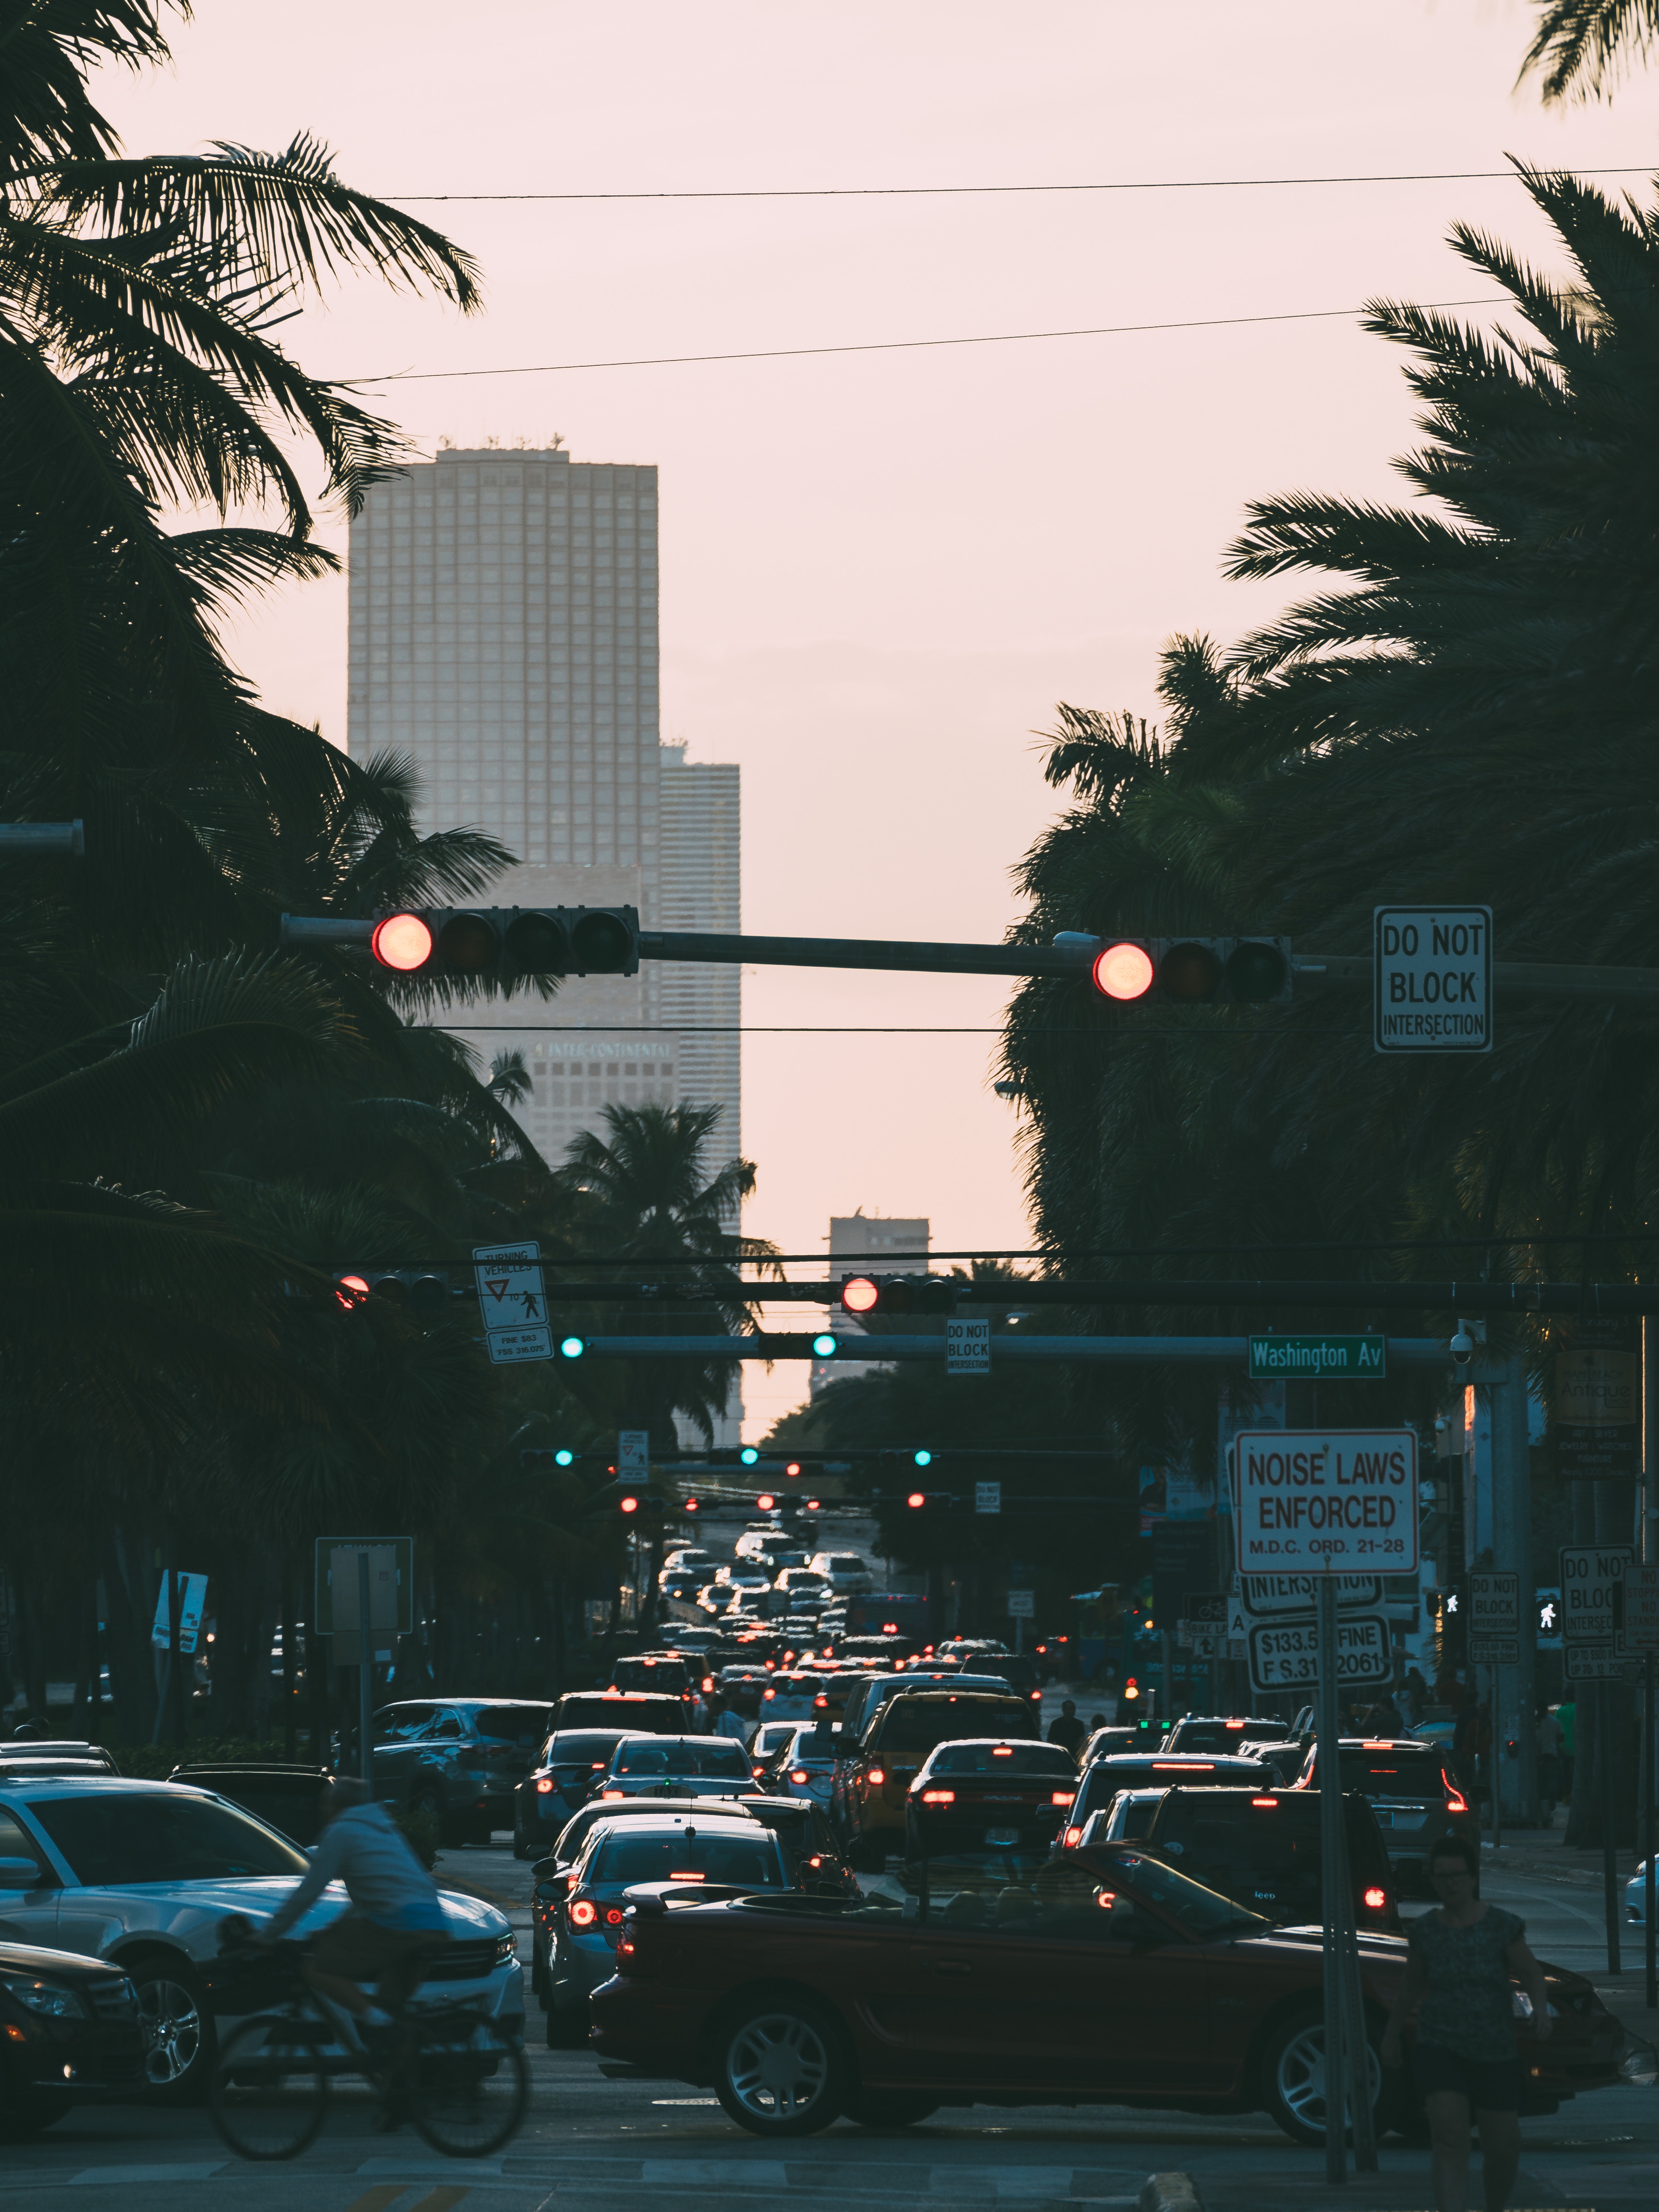 Autonomous vehicles could be great for the environment with the right policies in place. Source: Unsplash